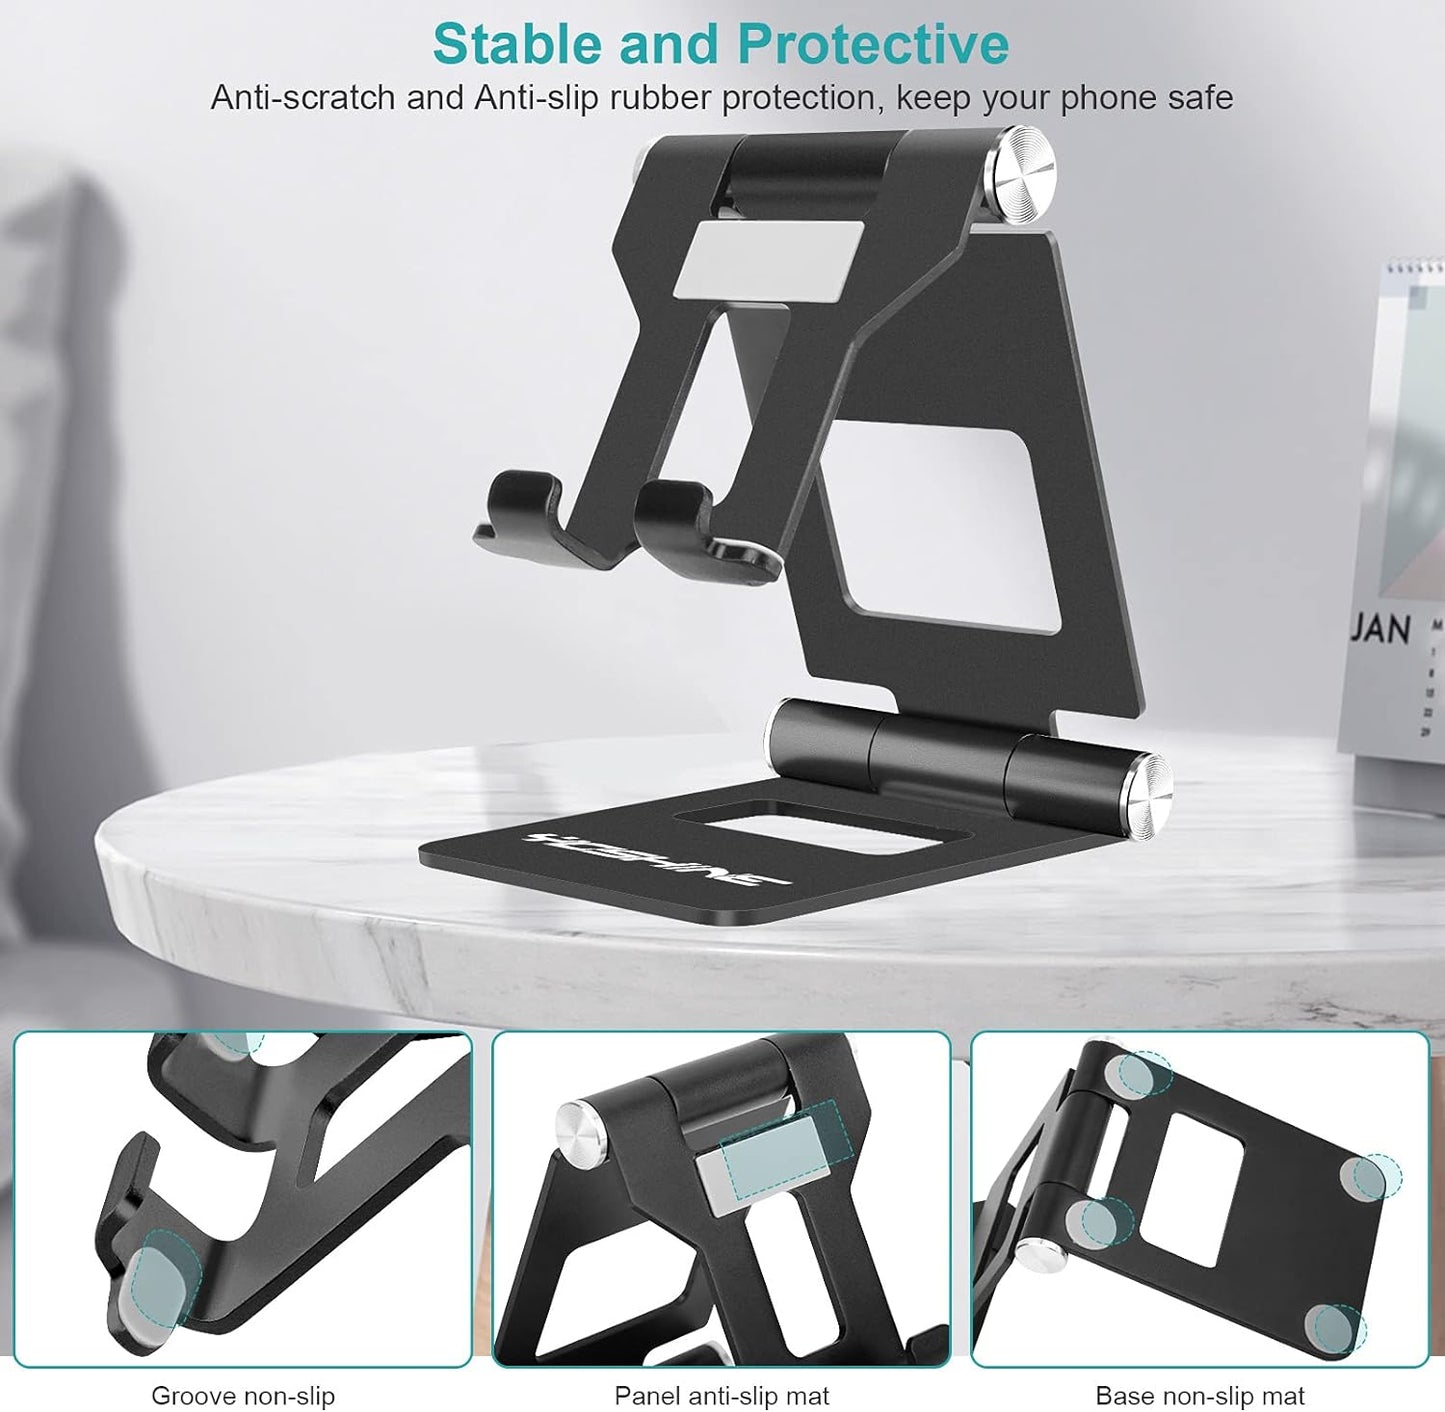 Phone Stand for Desk, Foldable Mobile Phone Stand with Non-Slip Base, Portable Mobile Phone Holder, Adjustable Cell Phone Stand, Solid Aluminum Stand Holder Dock for All Smart Phones - Black